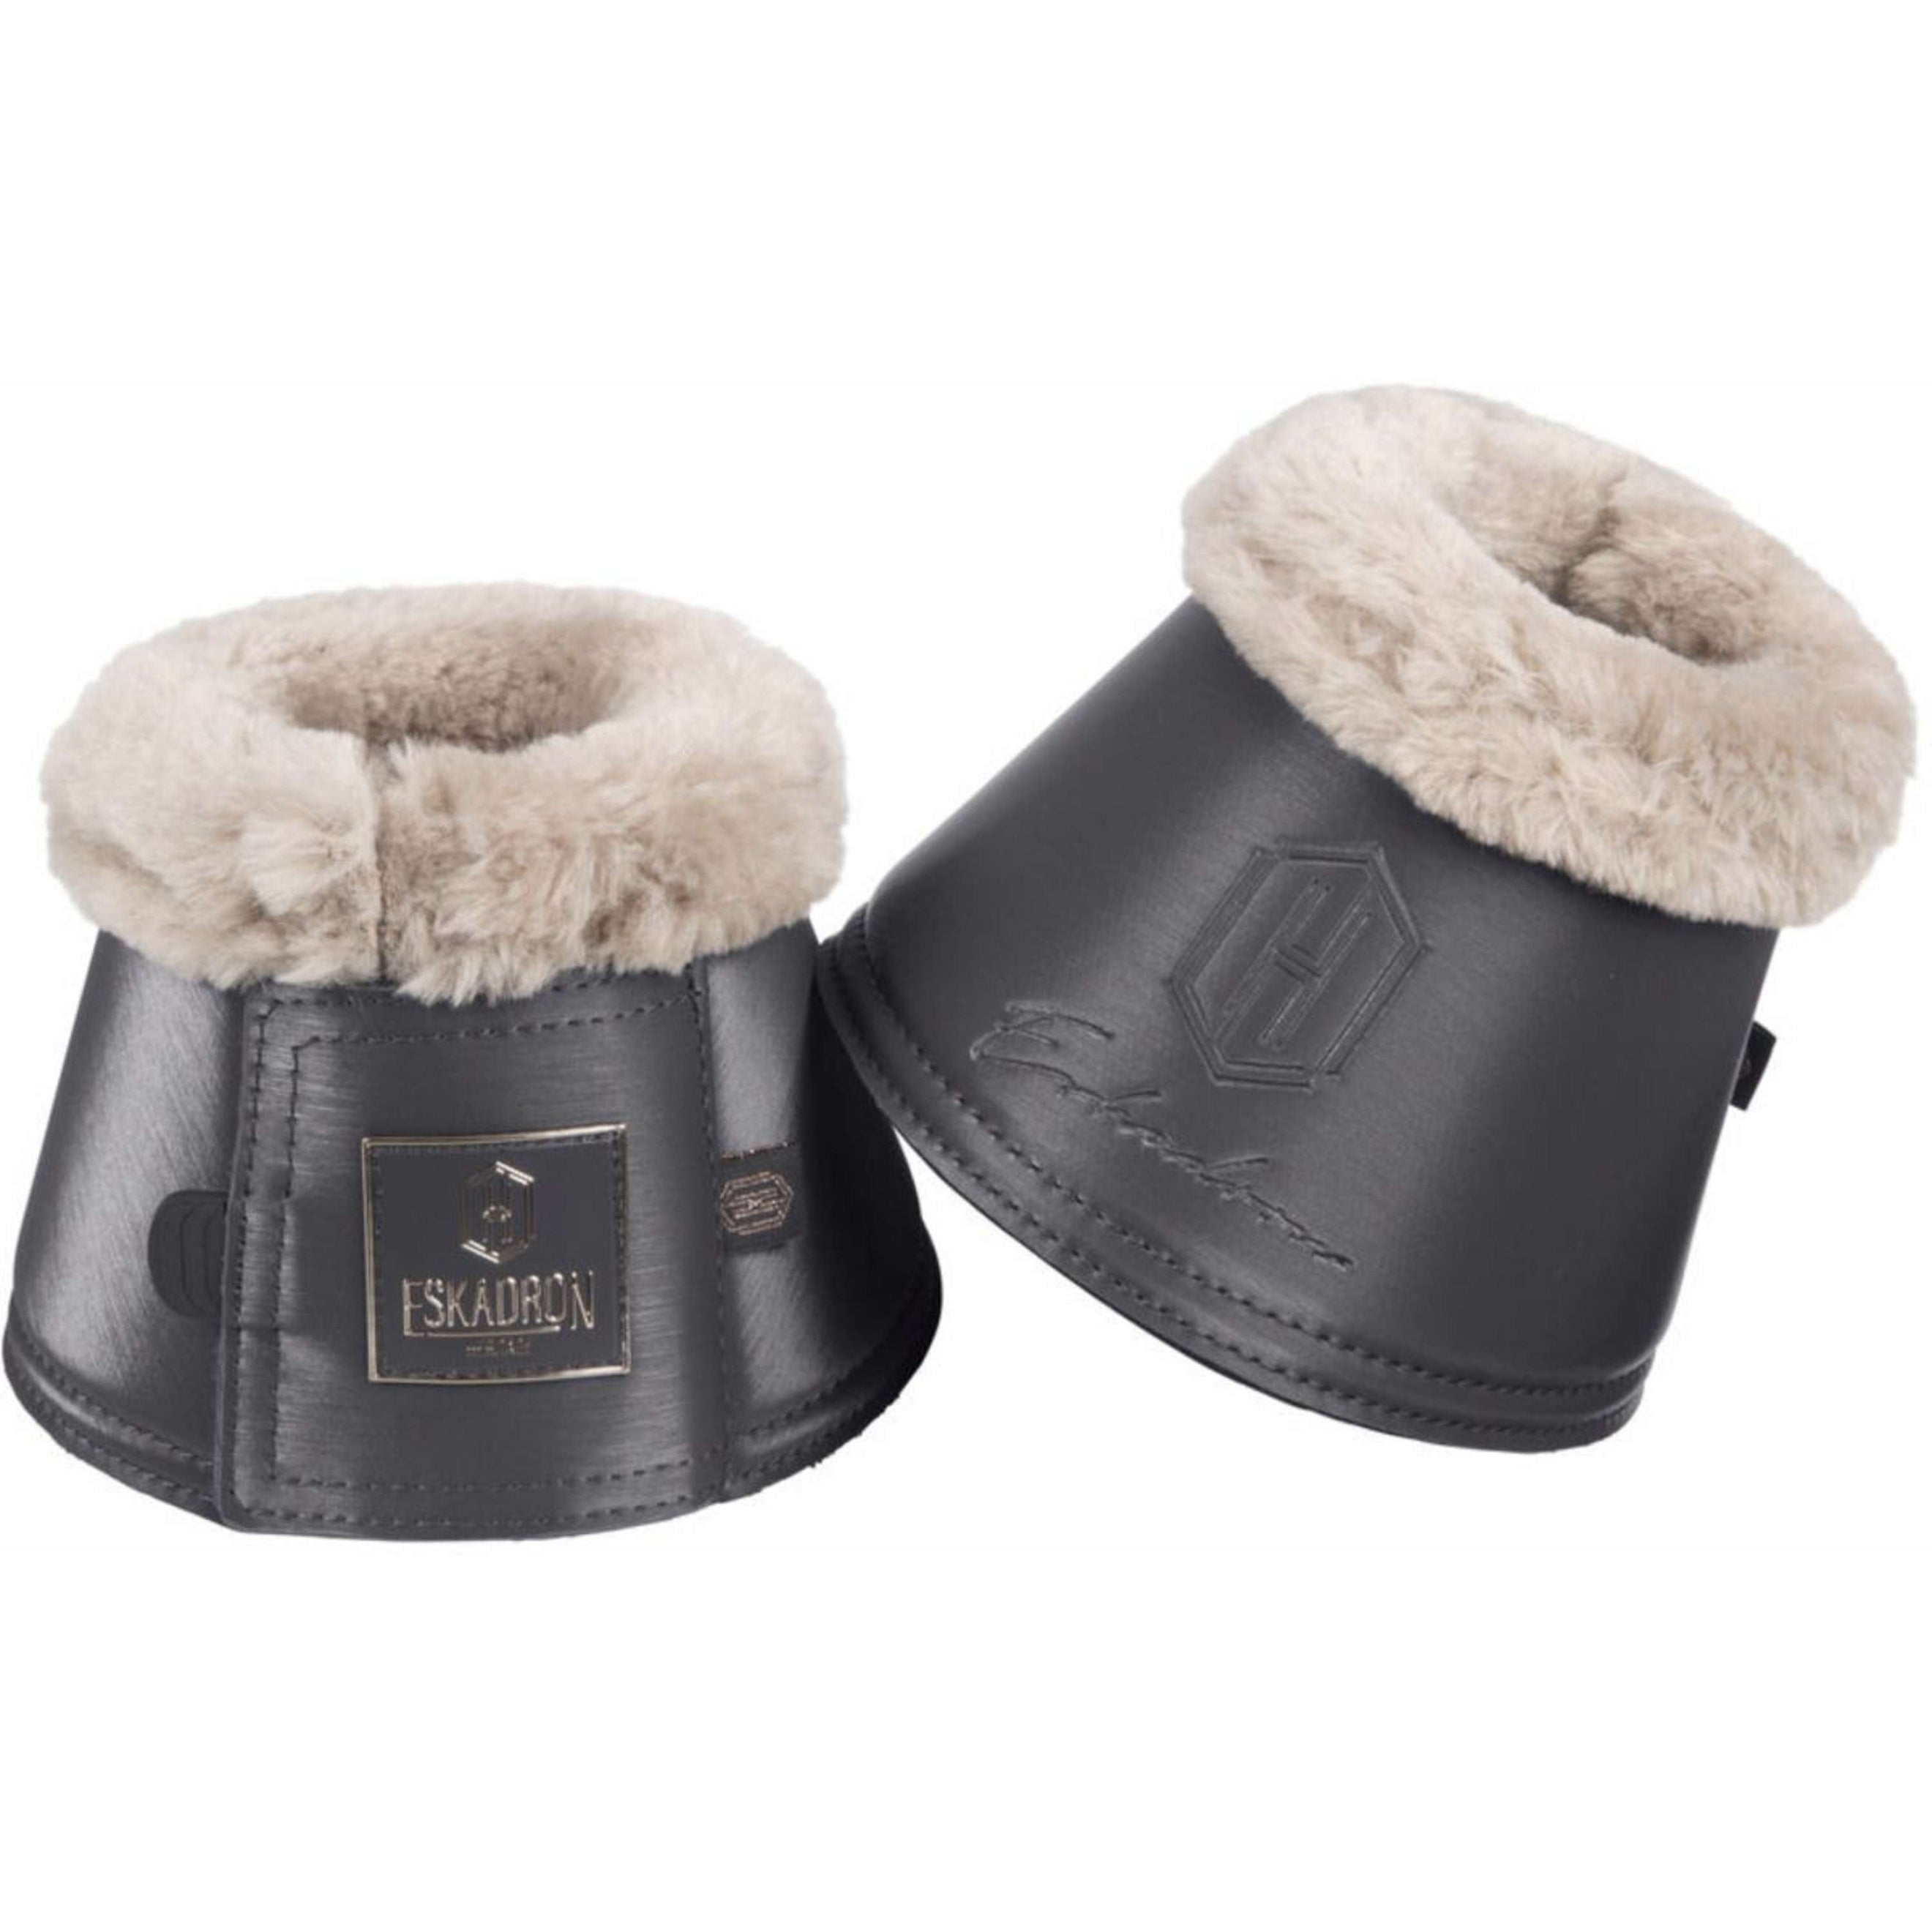 Eskadron Cloches d'Obstacles Heritage Glamslate FauxFur Basalt